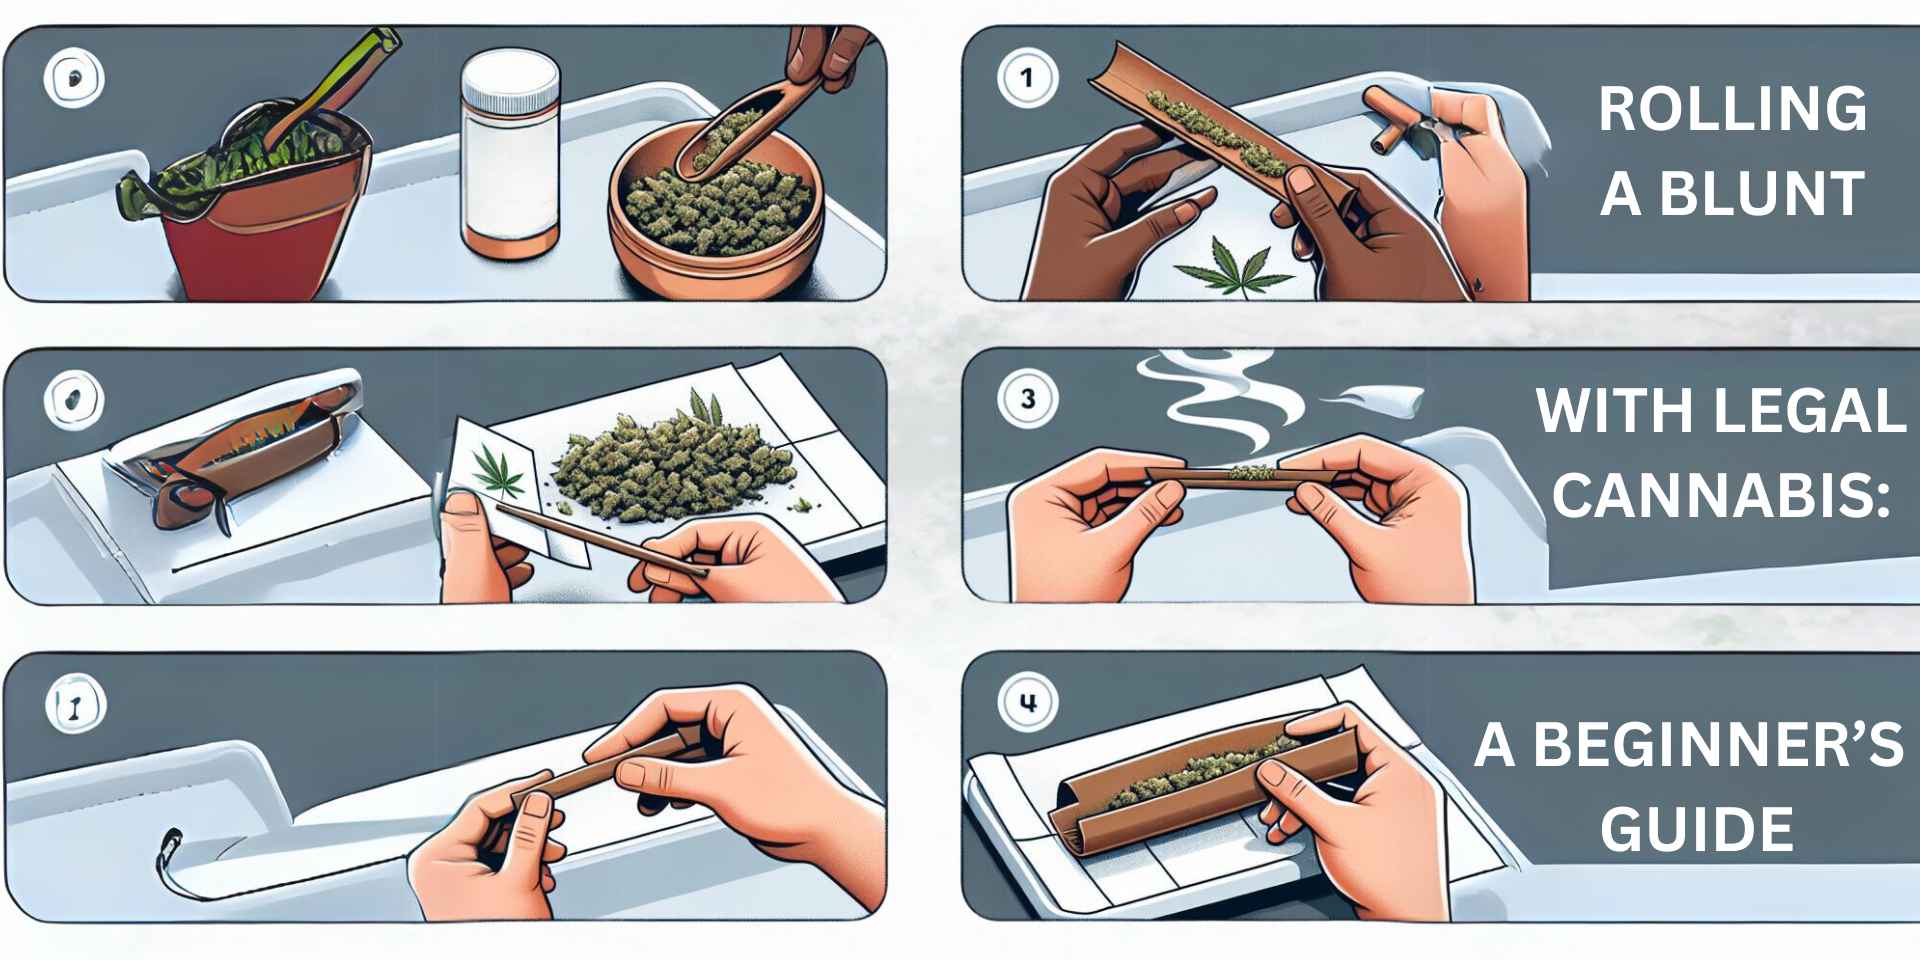 Rolling a Blunt with Legal Cannabis: A Beginner's Guide Banner by Cloud Legends 420